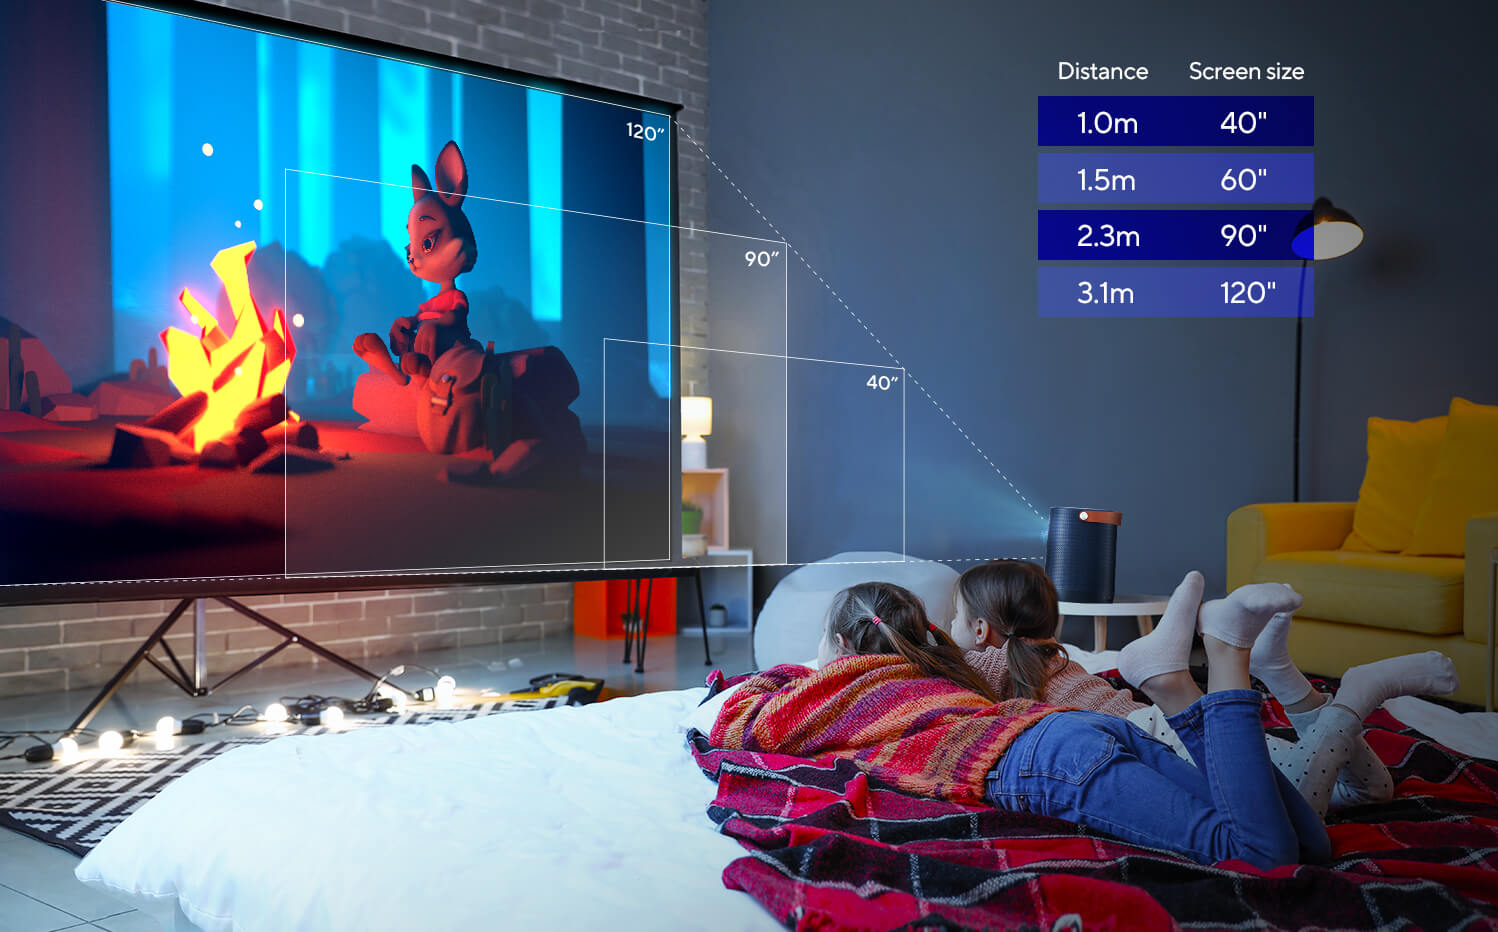 You can use the ASUS ZenBeam L2 to projector the content, size from 40-inch with 1 meter distance, up to size 120-inch with 3 meters.